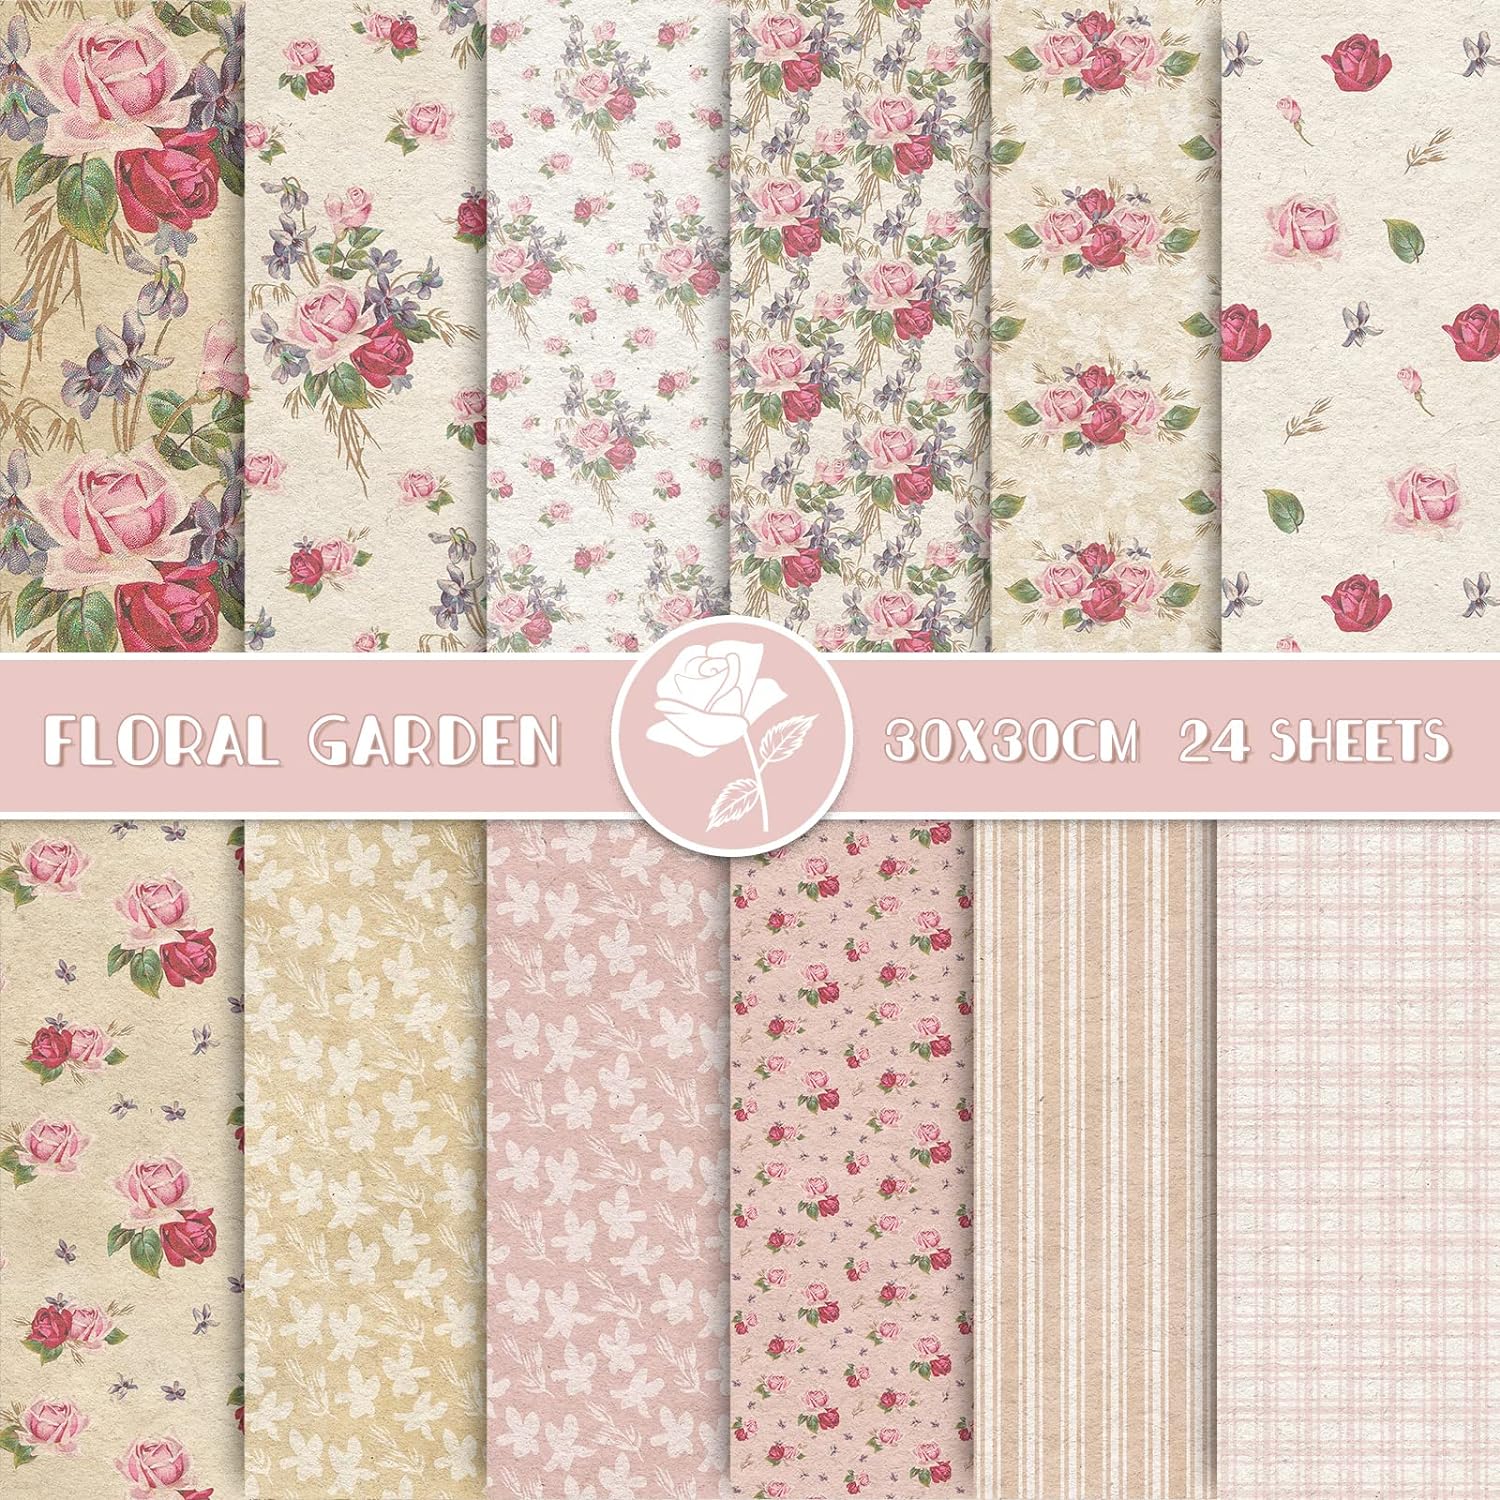 Whaline 12 Designs Spring Pattern Paper 24 Sheet Rose Floral Scrapbook Paper Pink Double-Sided Collection Decorative Craft Paper Folded Flat for Card Making Scrapbook Photo Album Decor, 30 x 30cm